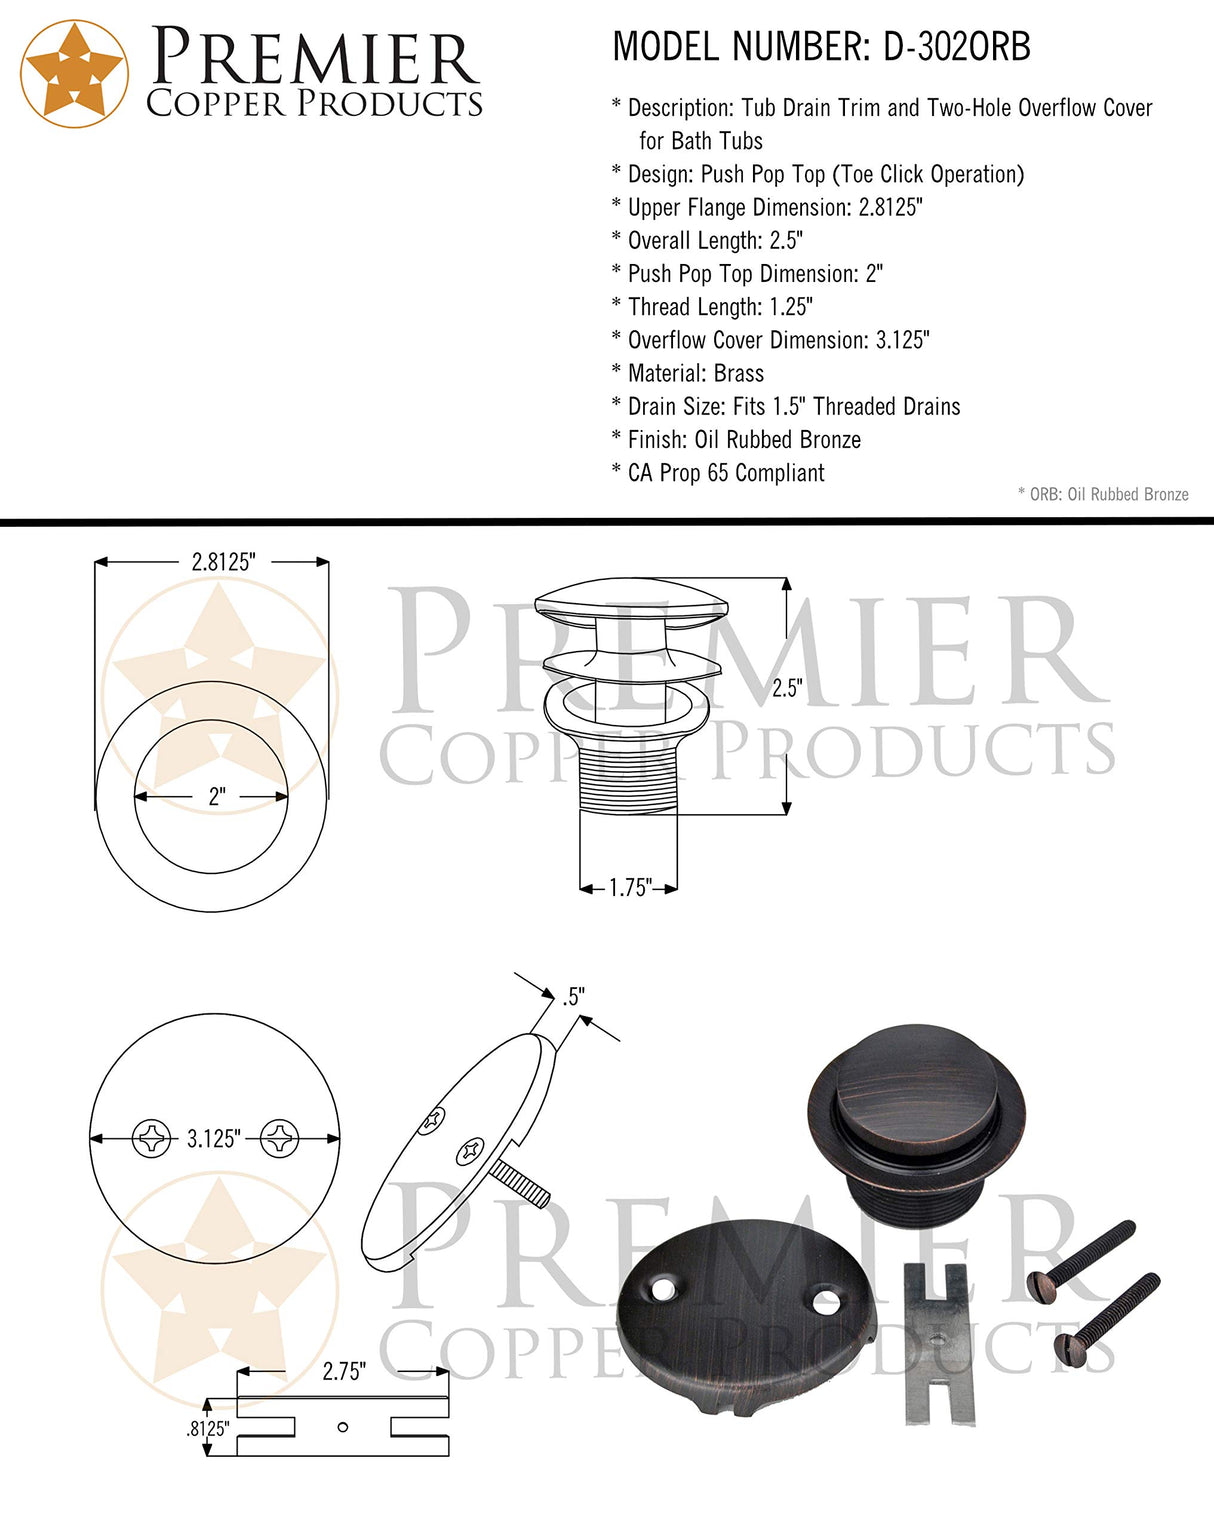 Premier Copper Products D-302ORB Tub Drain Trim and Two-Hole Overflow Cover for Bath Tubs, Oil Rubbed Bronze